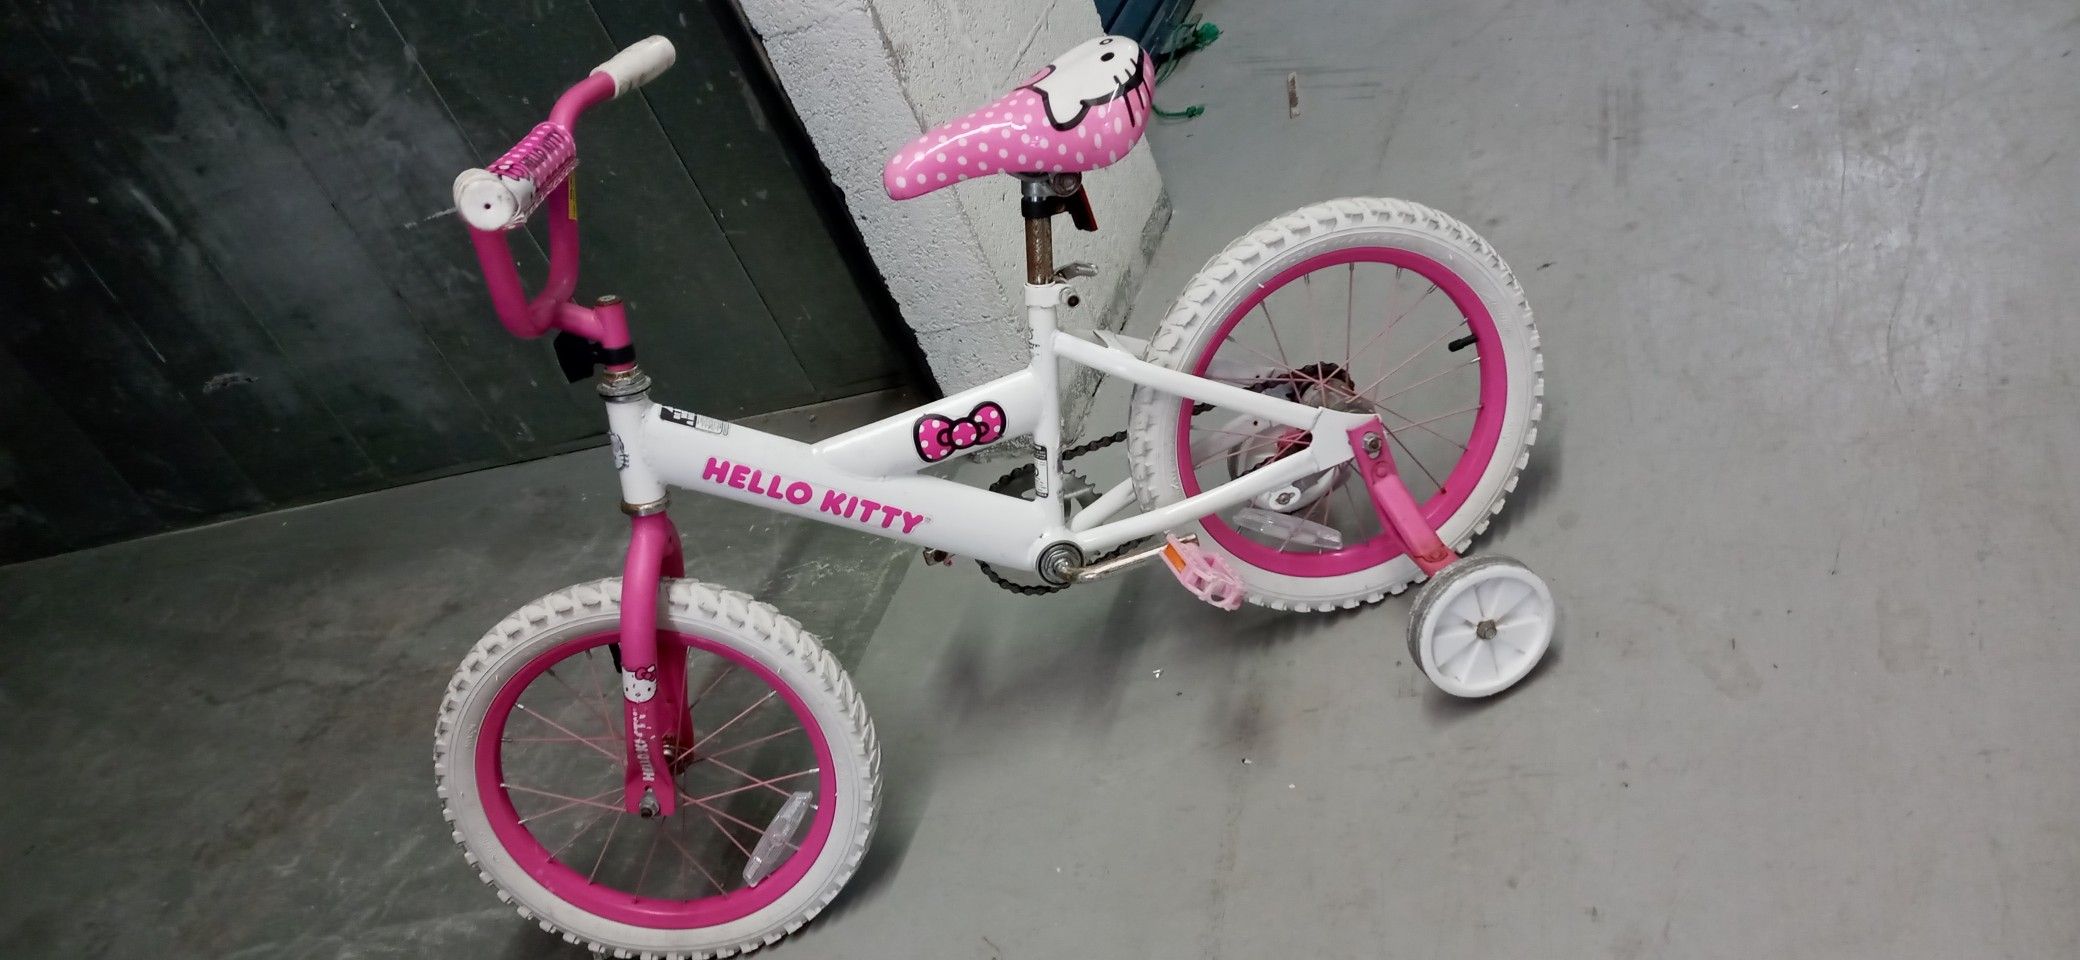 Make me an offer price negotiable. Hello kitty 16inches toddler bike